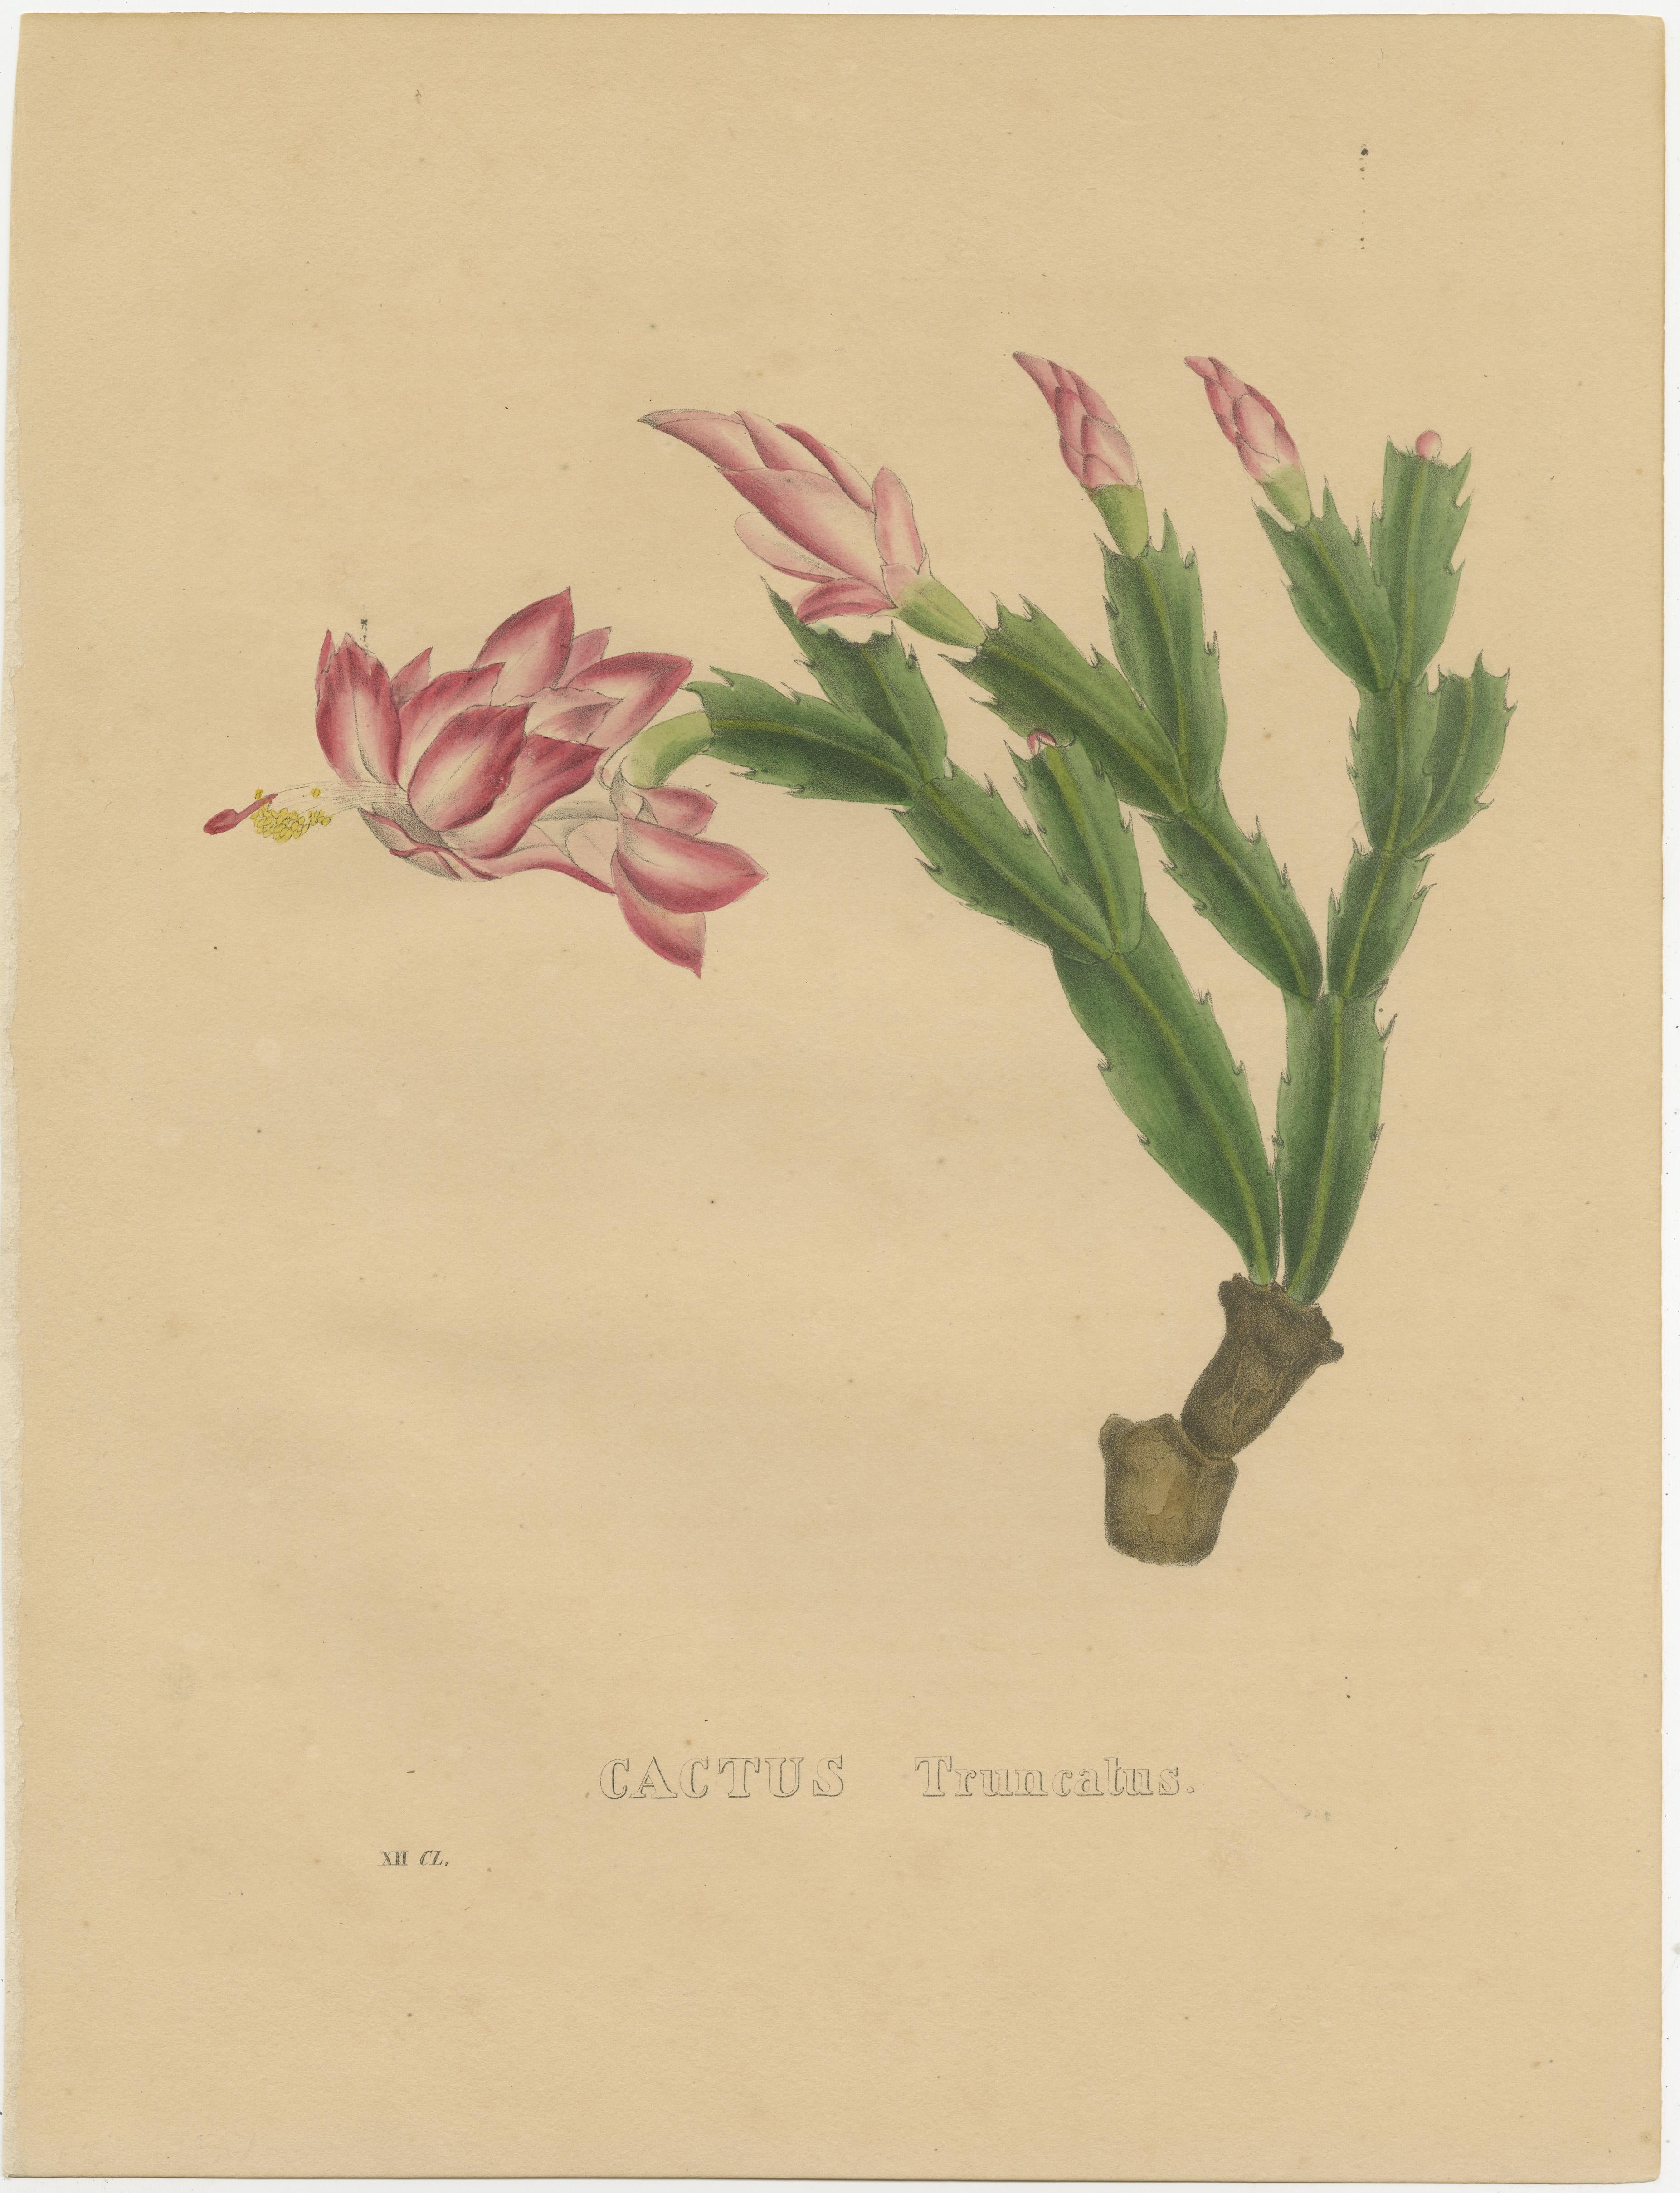 The antique botanical print titled 'Cactus Truncatus' is a beautiful depiction of the Schlumbergera, commonly known as the Christmas cactus. Here's some information about this print:

1. **Title:** 'Cactus Truncatus'

2. **Botanical Significance:**